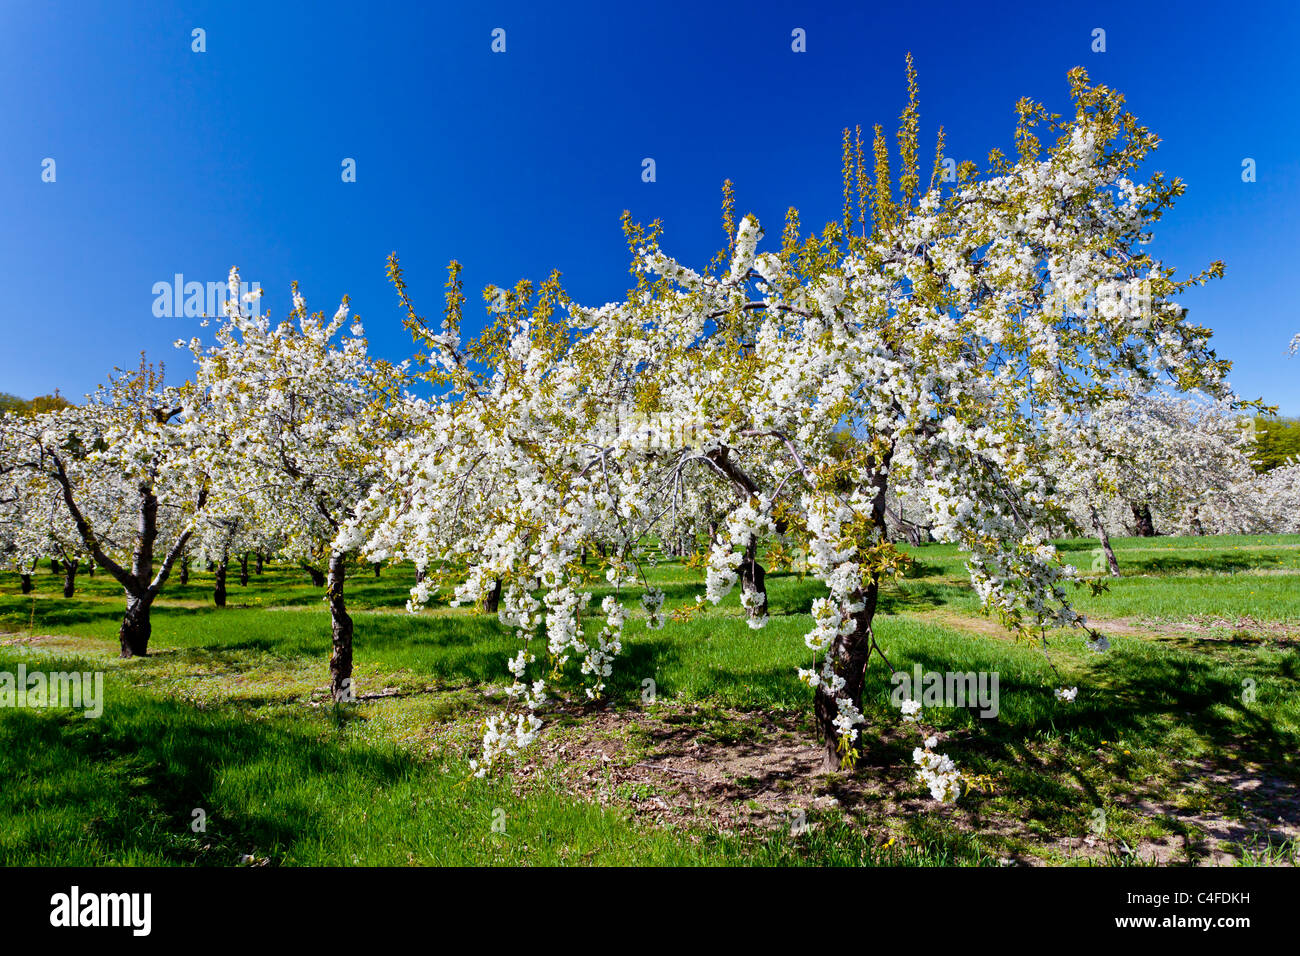 Cherry trees in bloom on the Old Mission Peninsula near Traverse City, Michigan, USA. Stock Photo